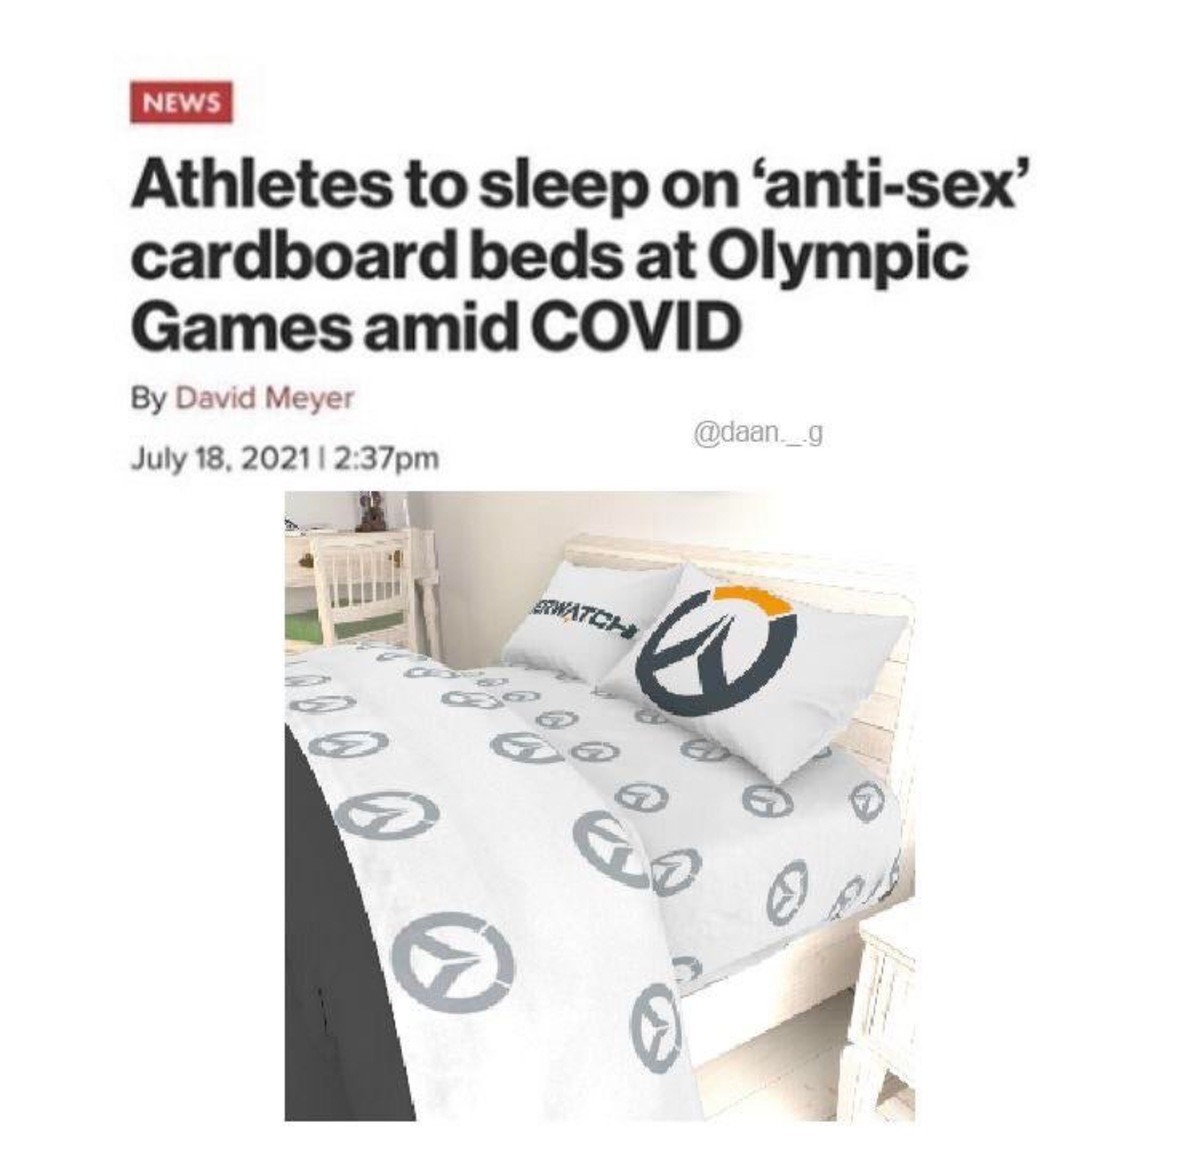 Blizzard Beds. join list: OverwatchStuff (1416 subs)Mention Clicks: 342949Msgs Sent: 2954101Mention History.. cmon man this was proven fake the same day it was made. it's just beds, made from materials. and they tried to get away whit it by calling them anti sex beds cu